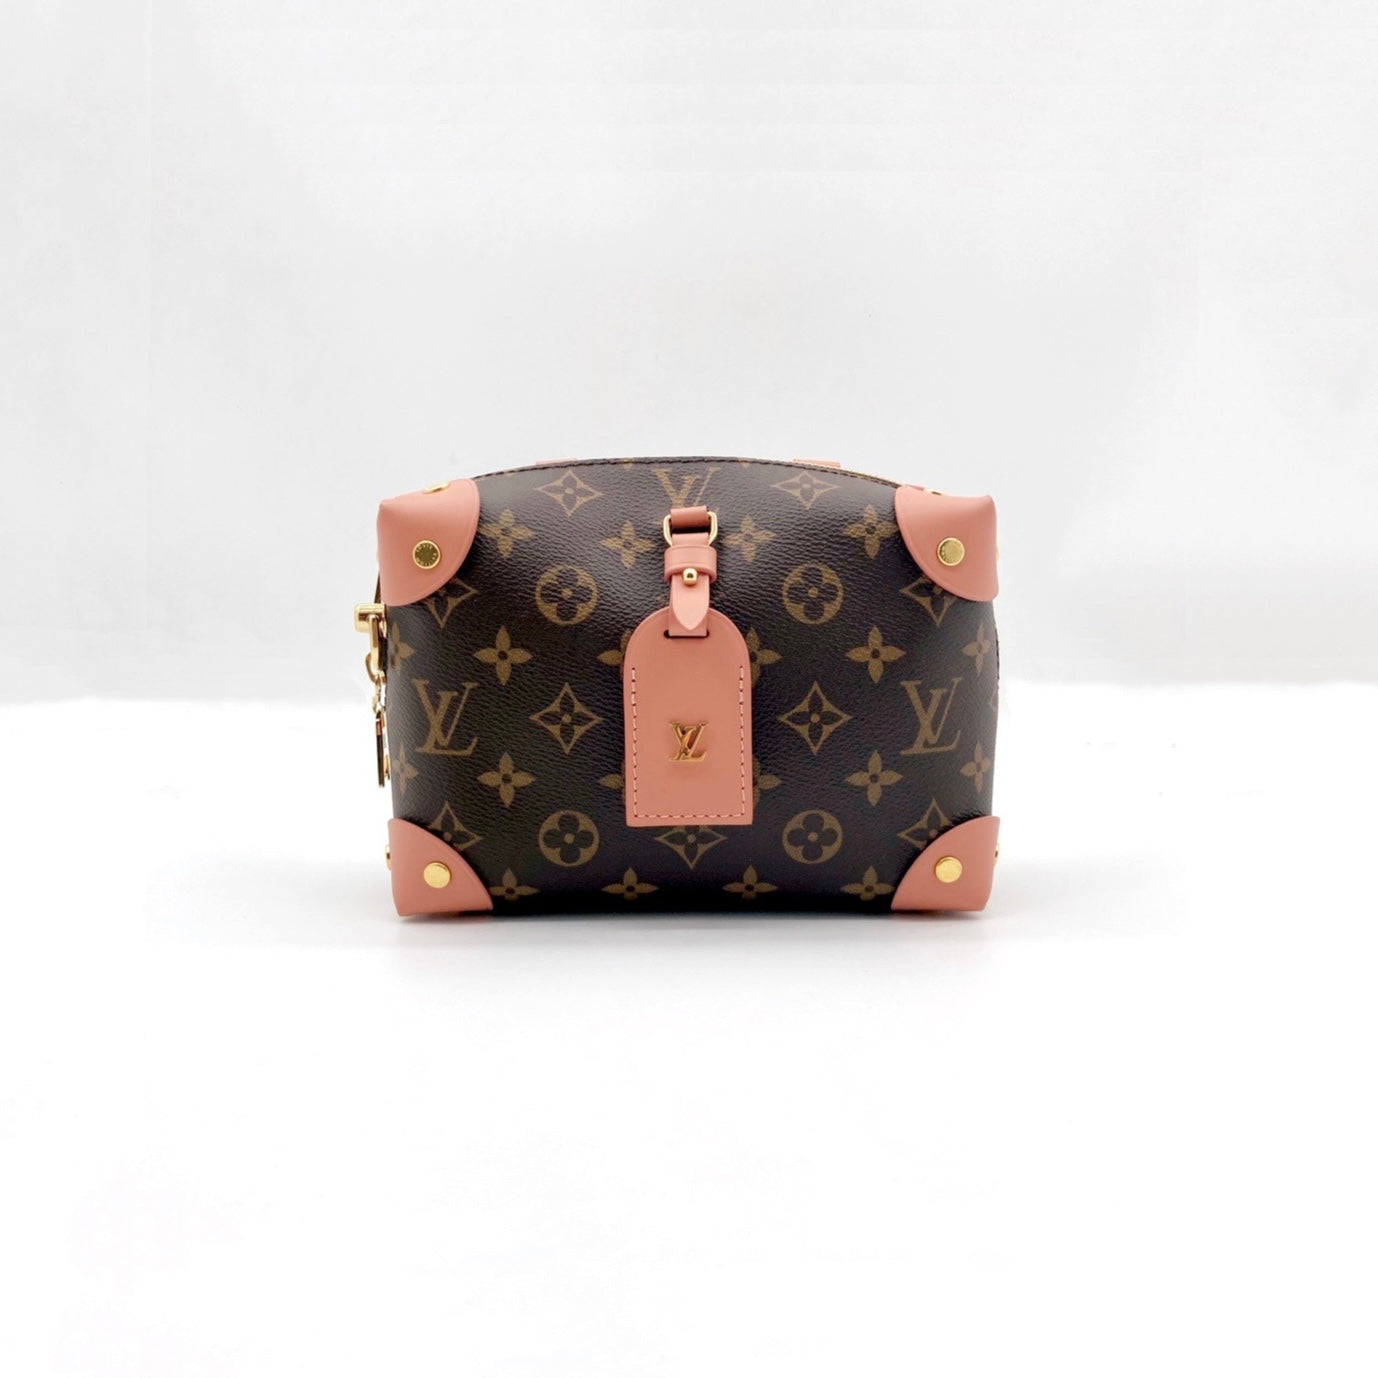 Petite malle leather crossbody bag Louis Vuitton Brown in Leather